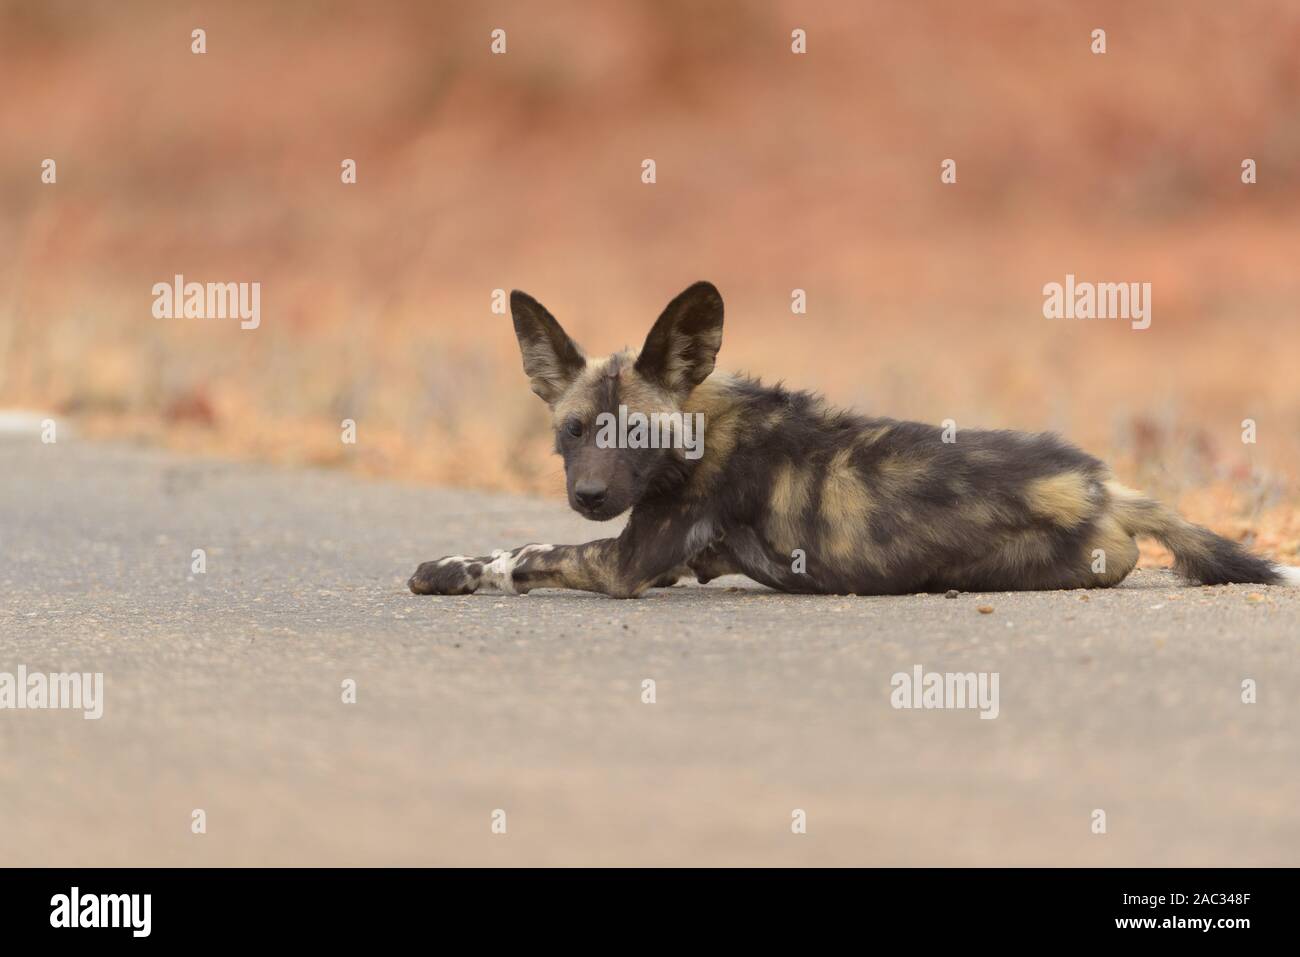 African wild dog, Painted wolf portrait Stock Photo